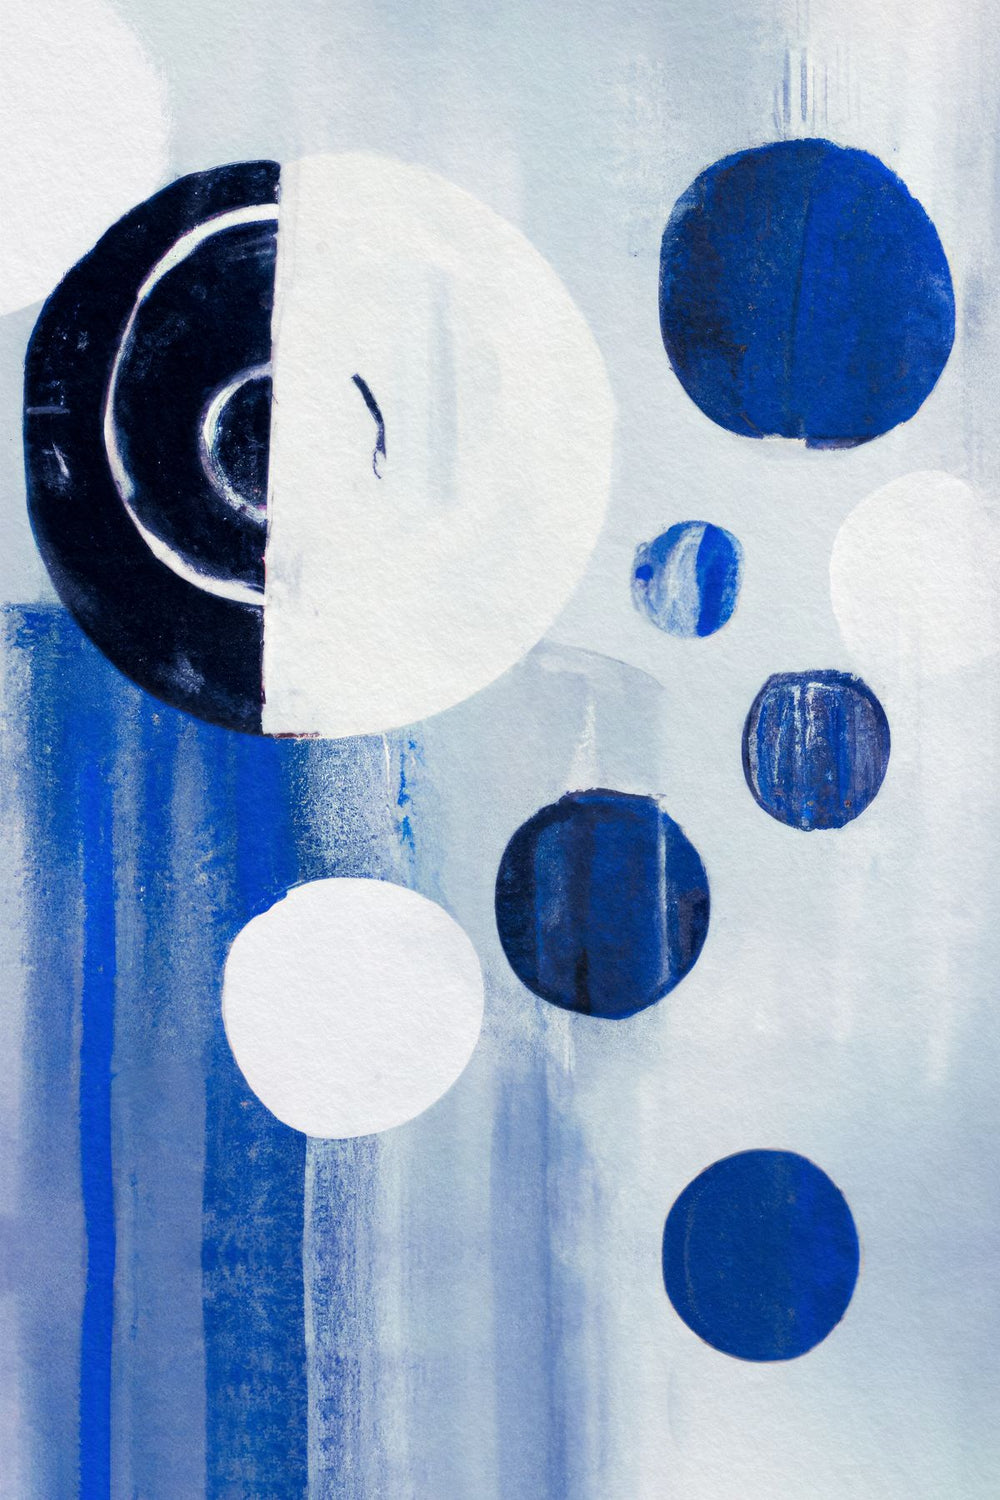 Abstract Spheres Of Blue